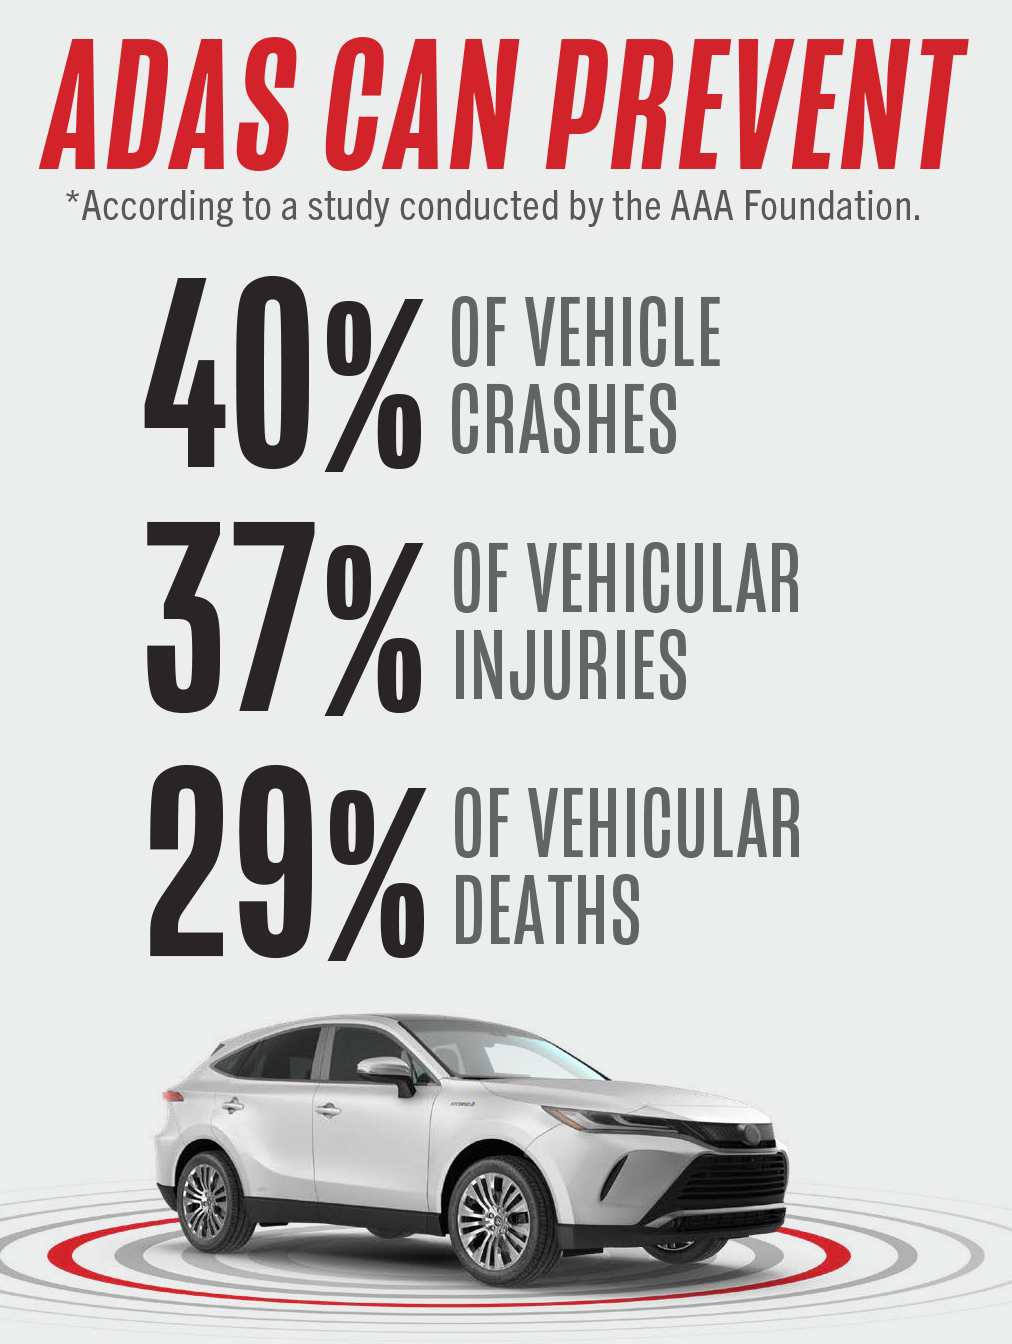 ADAS Can Prevent 40% of crashes, 37% of vehicular injuries, and 29% of vehicular deaths.